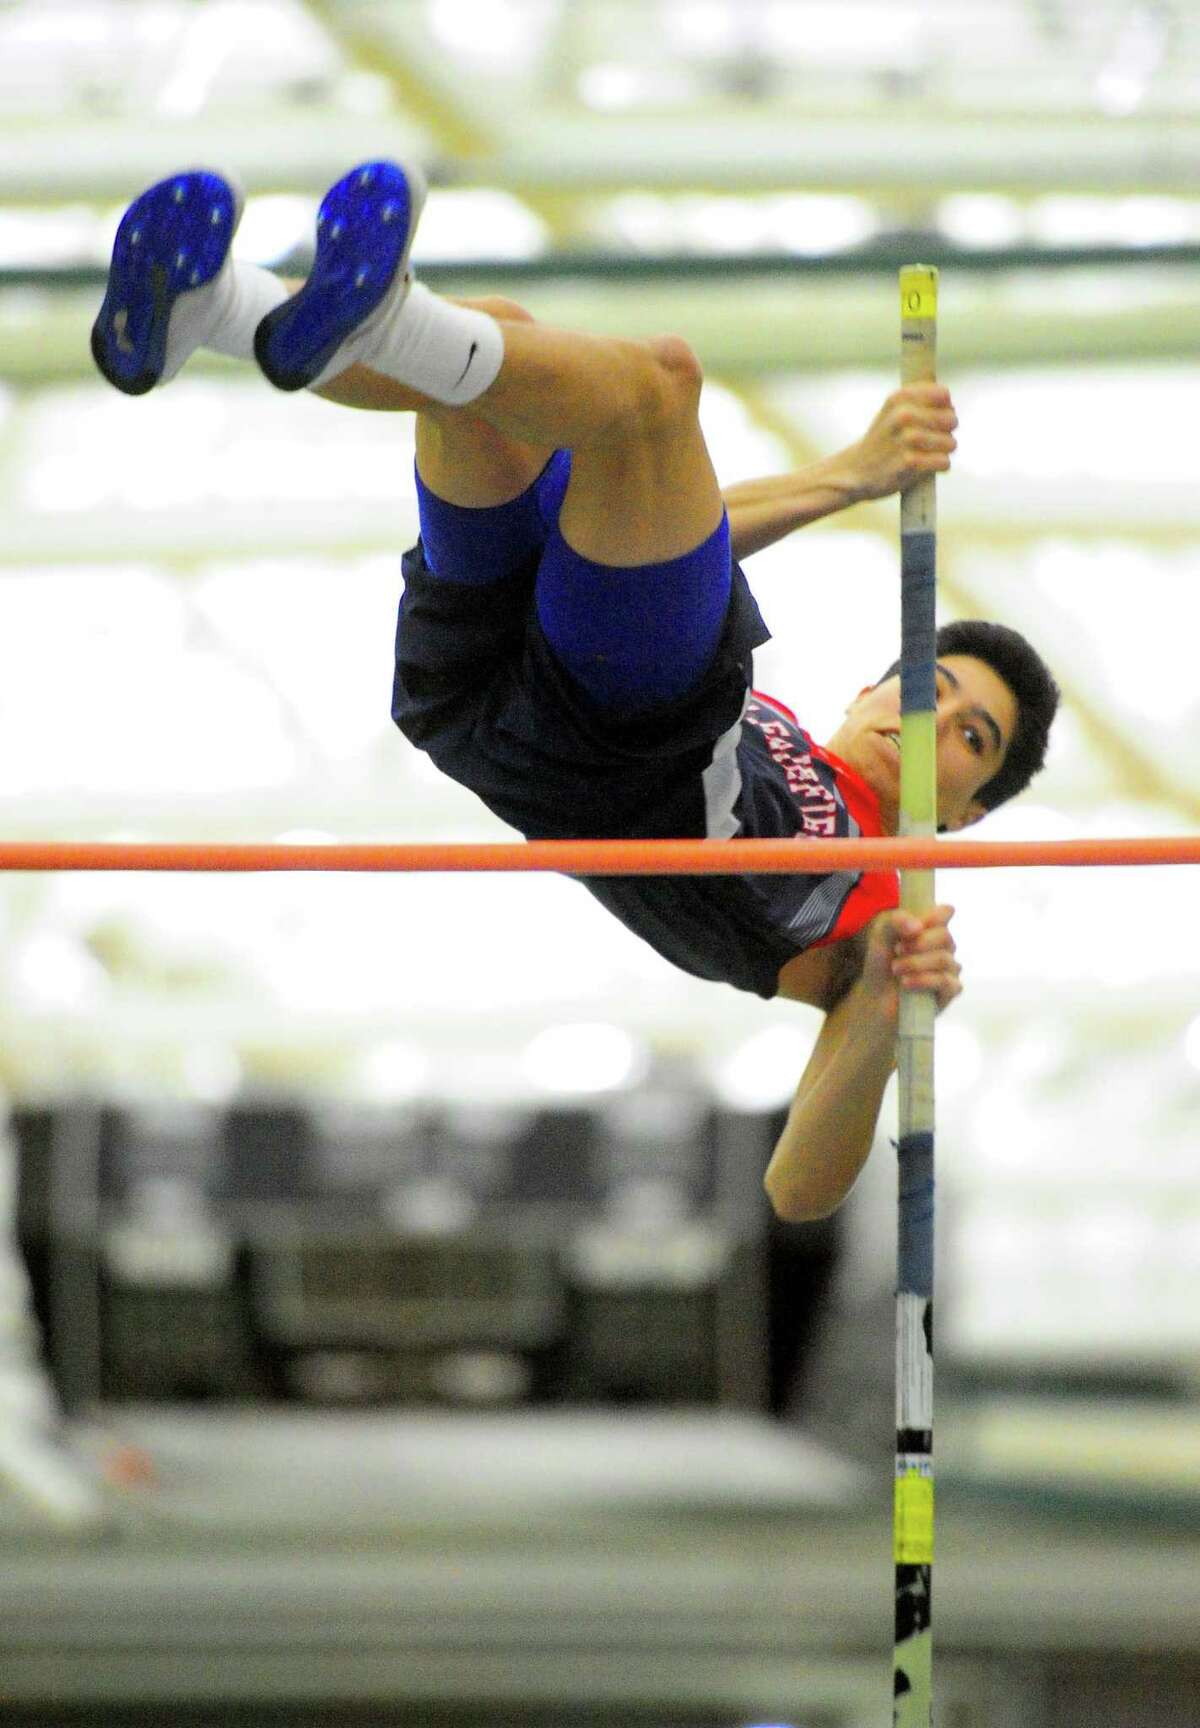 New Fairfield’s David Murphy competes in the pole vault during the SWC Indoor Track and Field Championships in New Haven on Saturday.